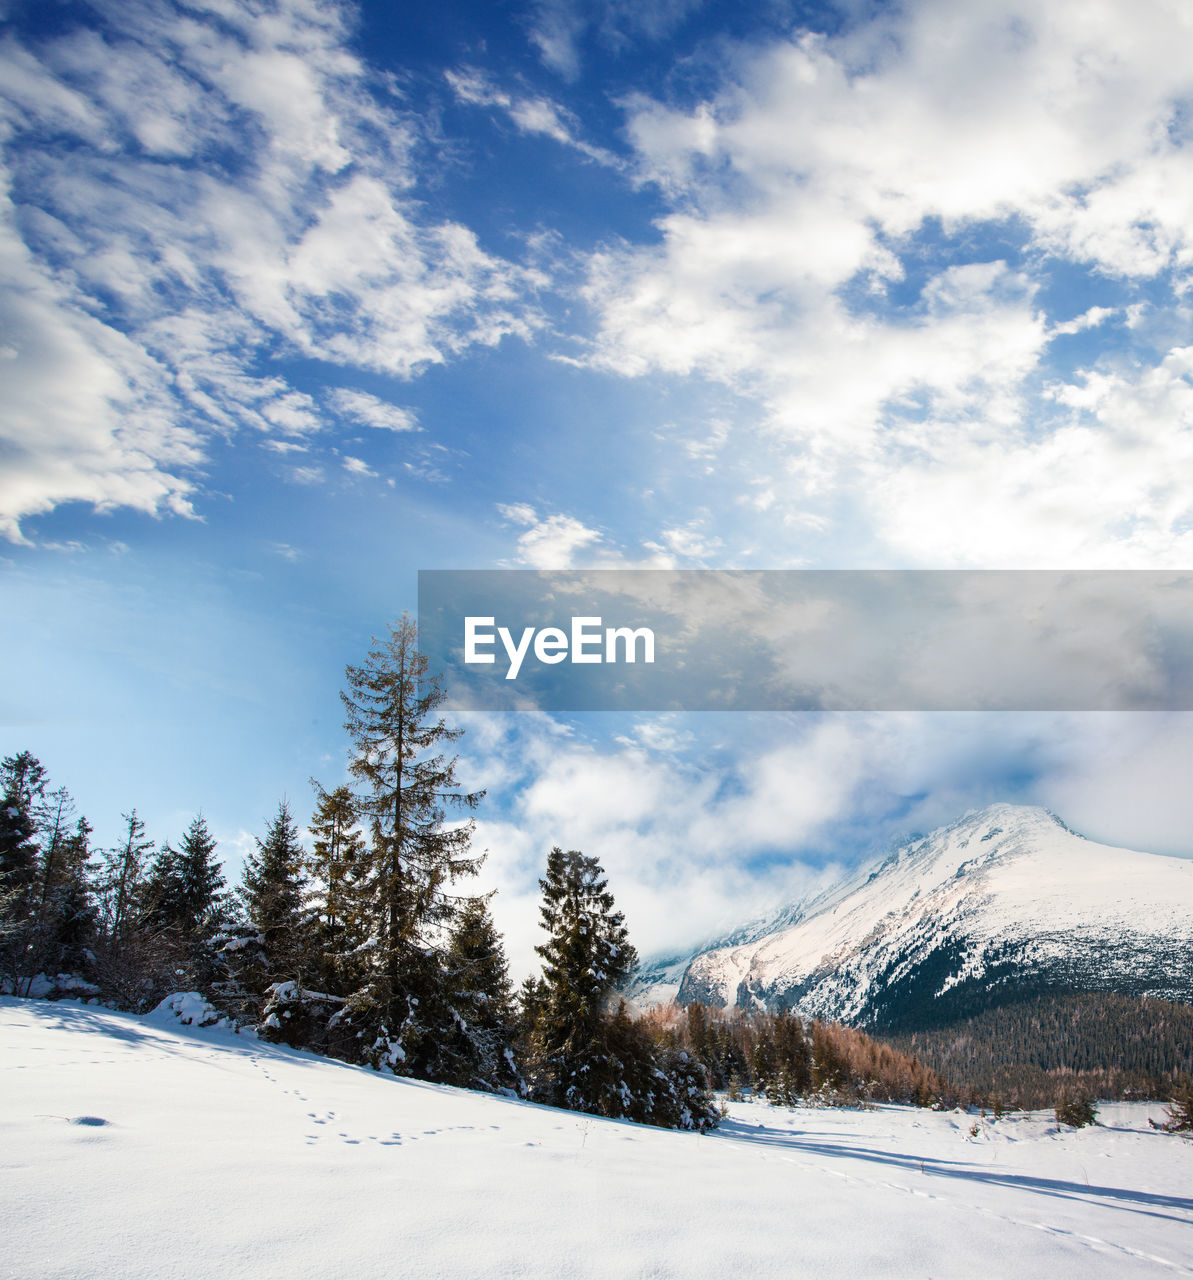 SCENIC VIEW OF SNOW COVERED LANDSCAPE AGAINST SKY